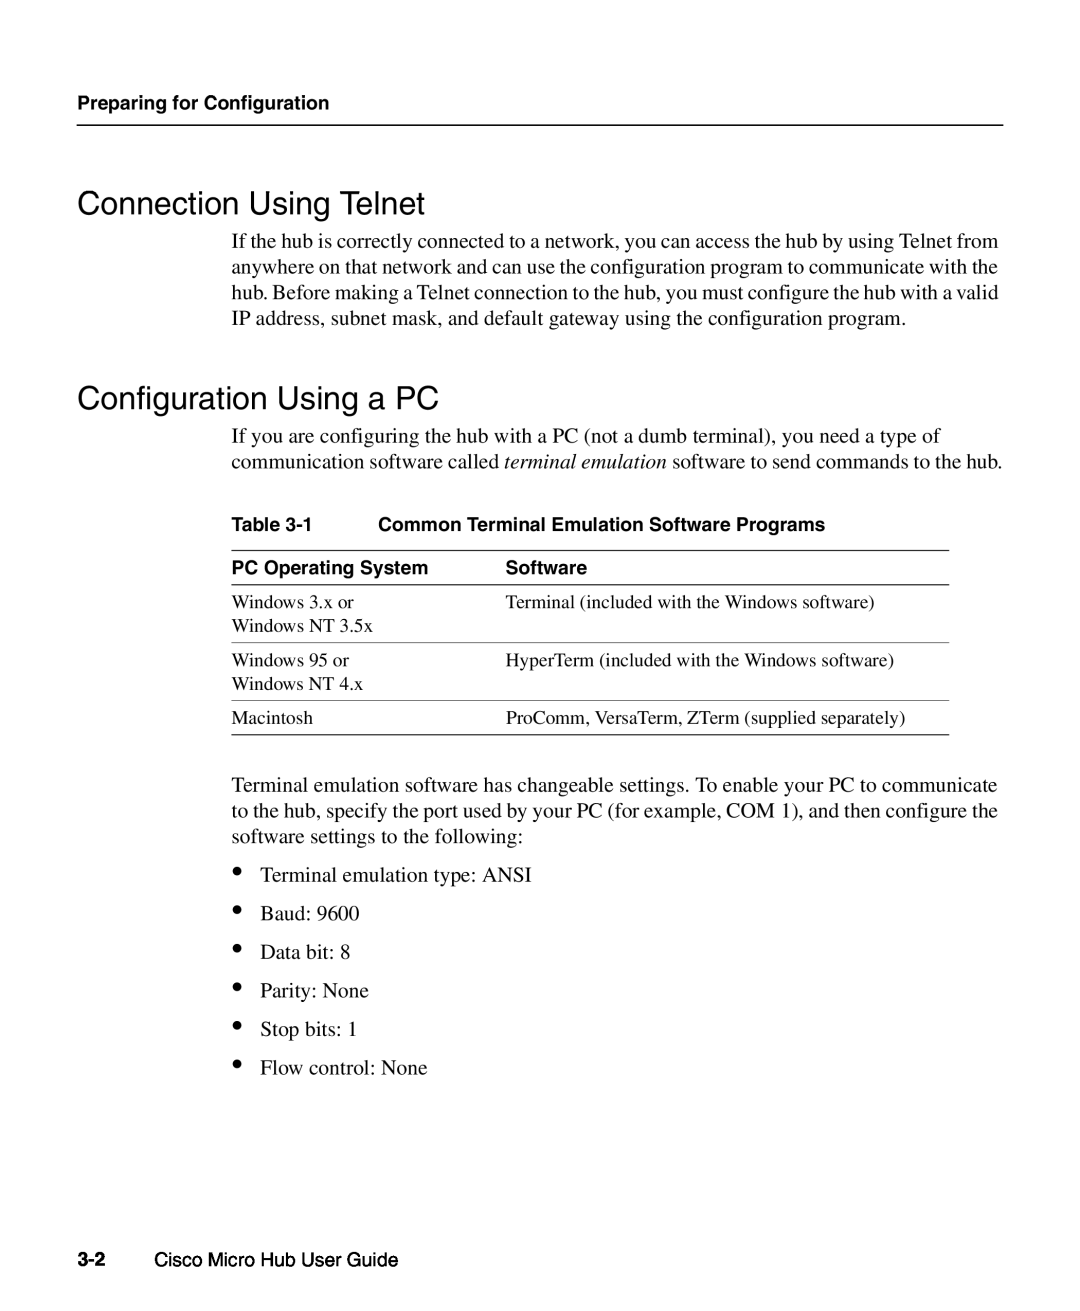 Cisco Systems 1503 manual Connection Using Telnet, Configuration Using a PC 